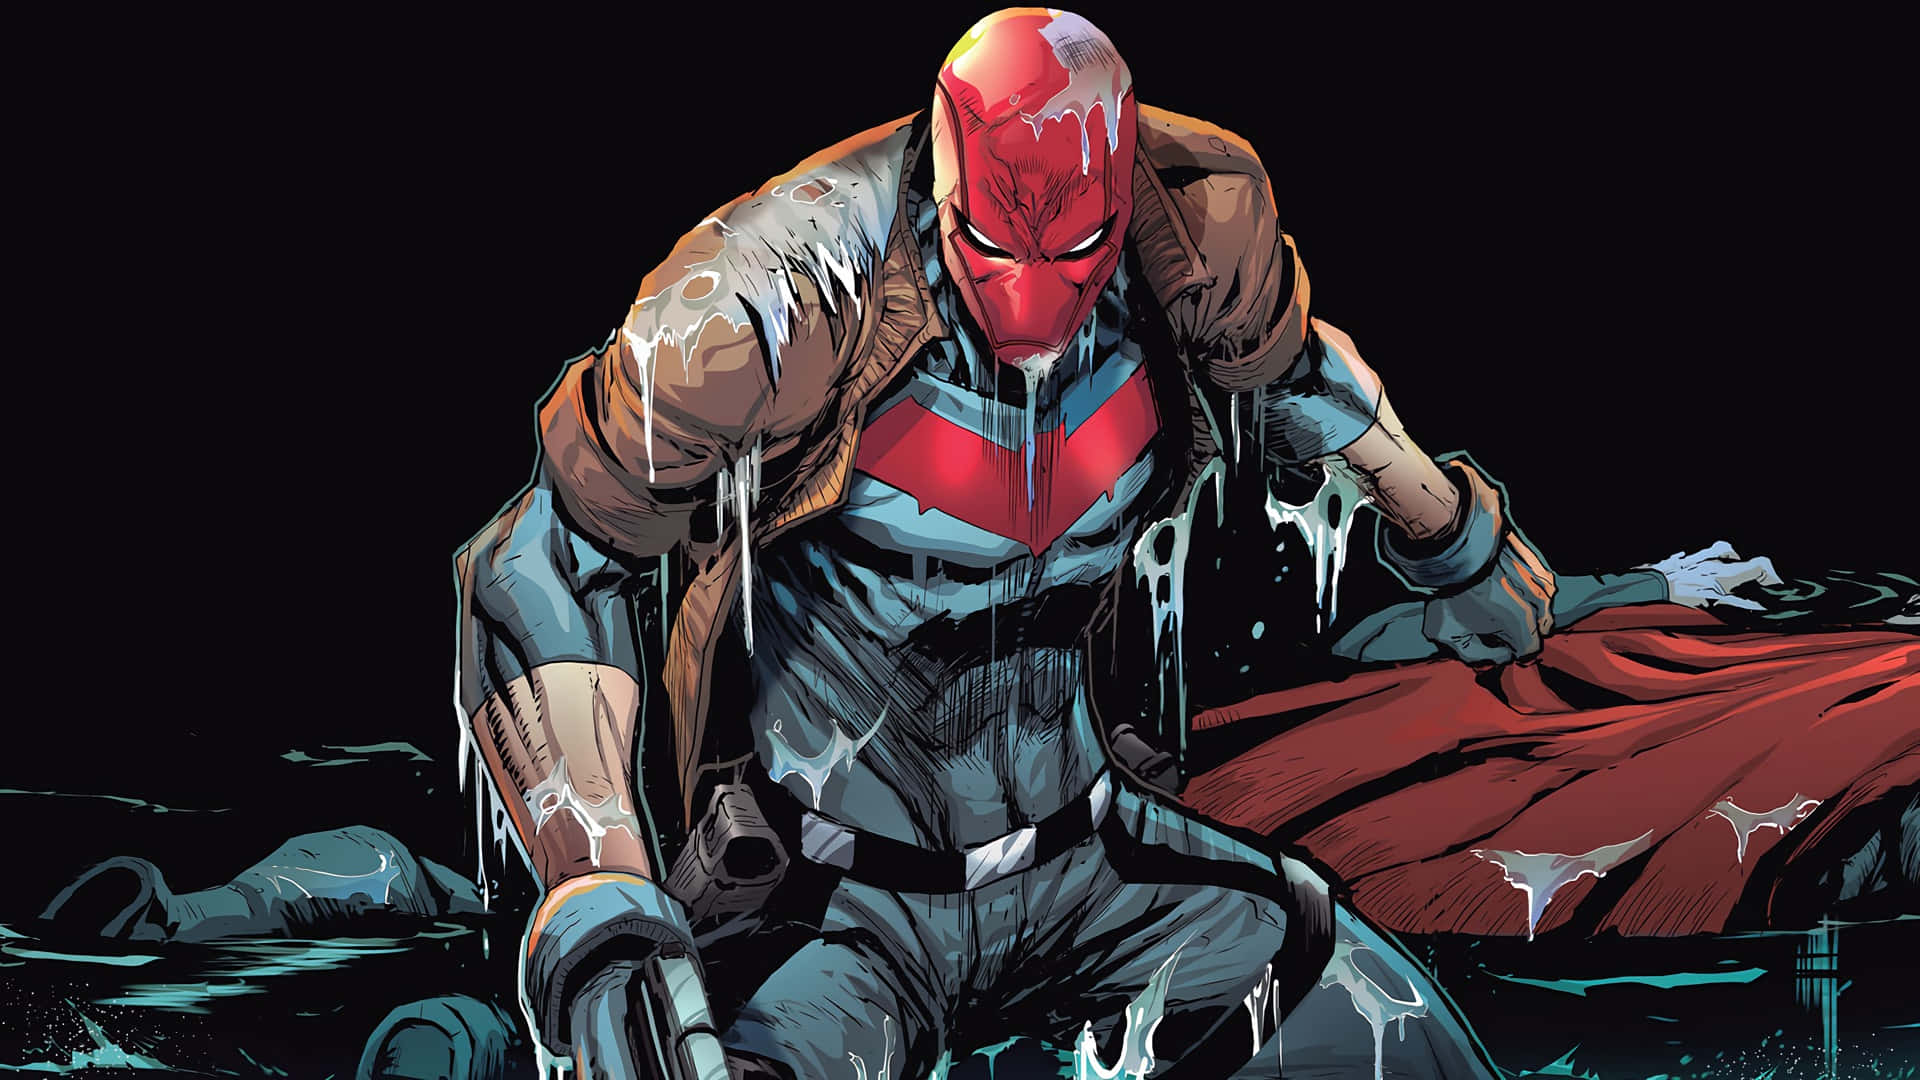 Red Hood dons his iconic red cape to take on the world.